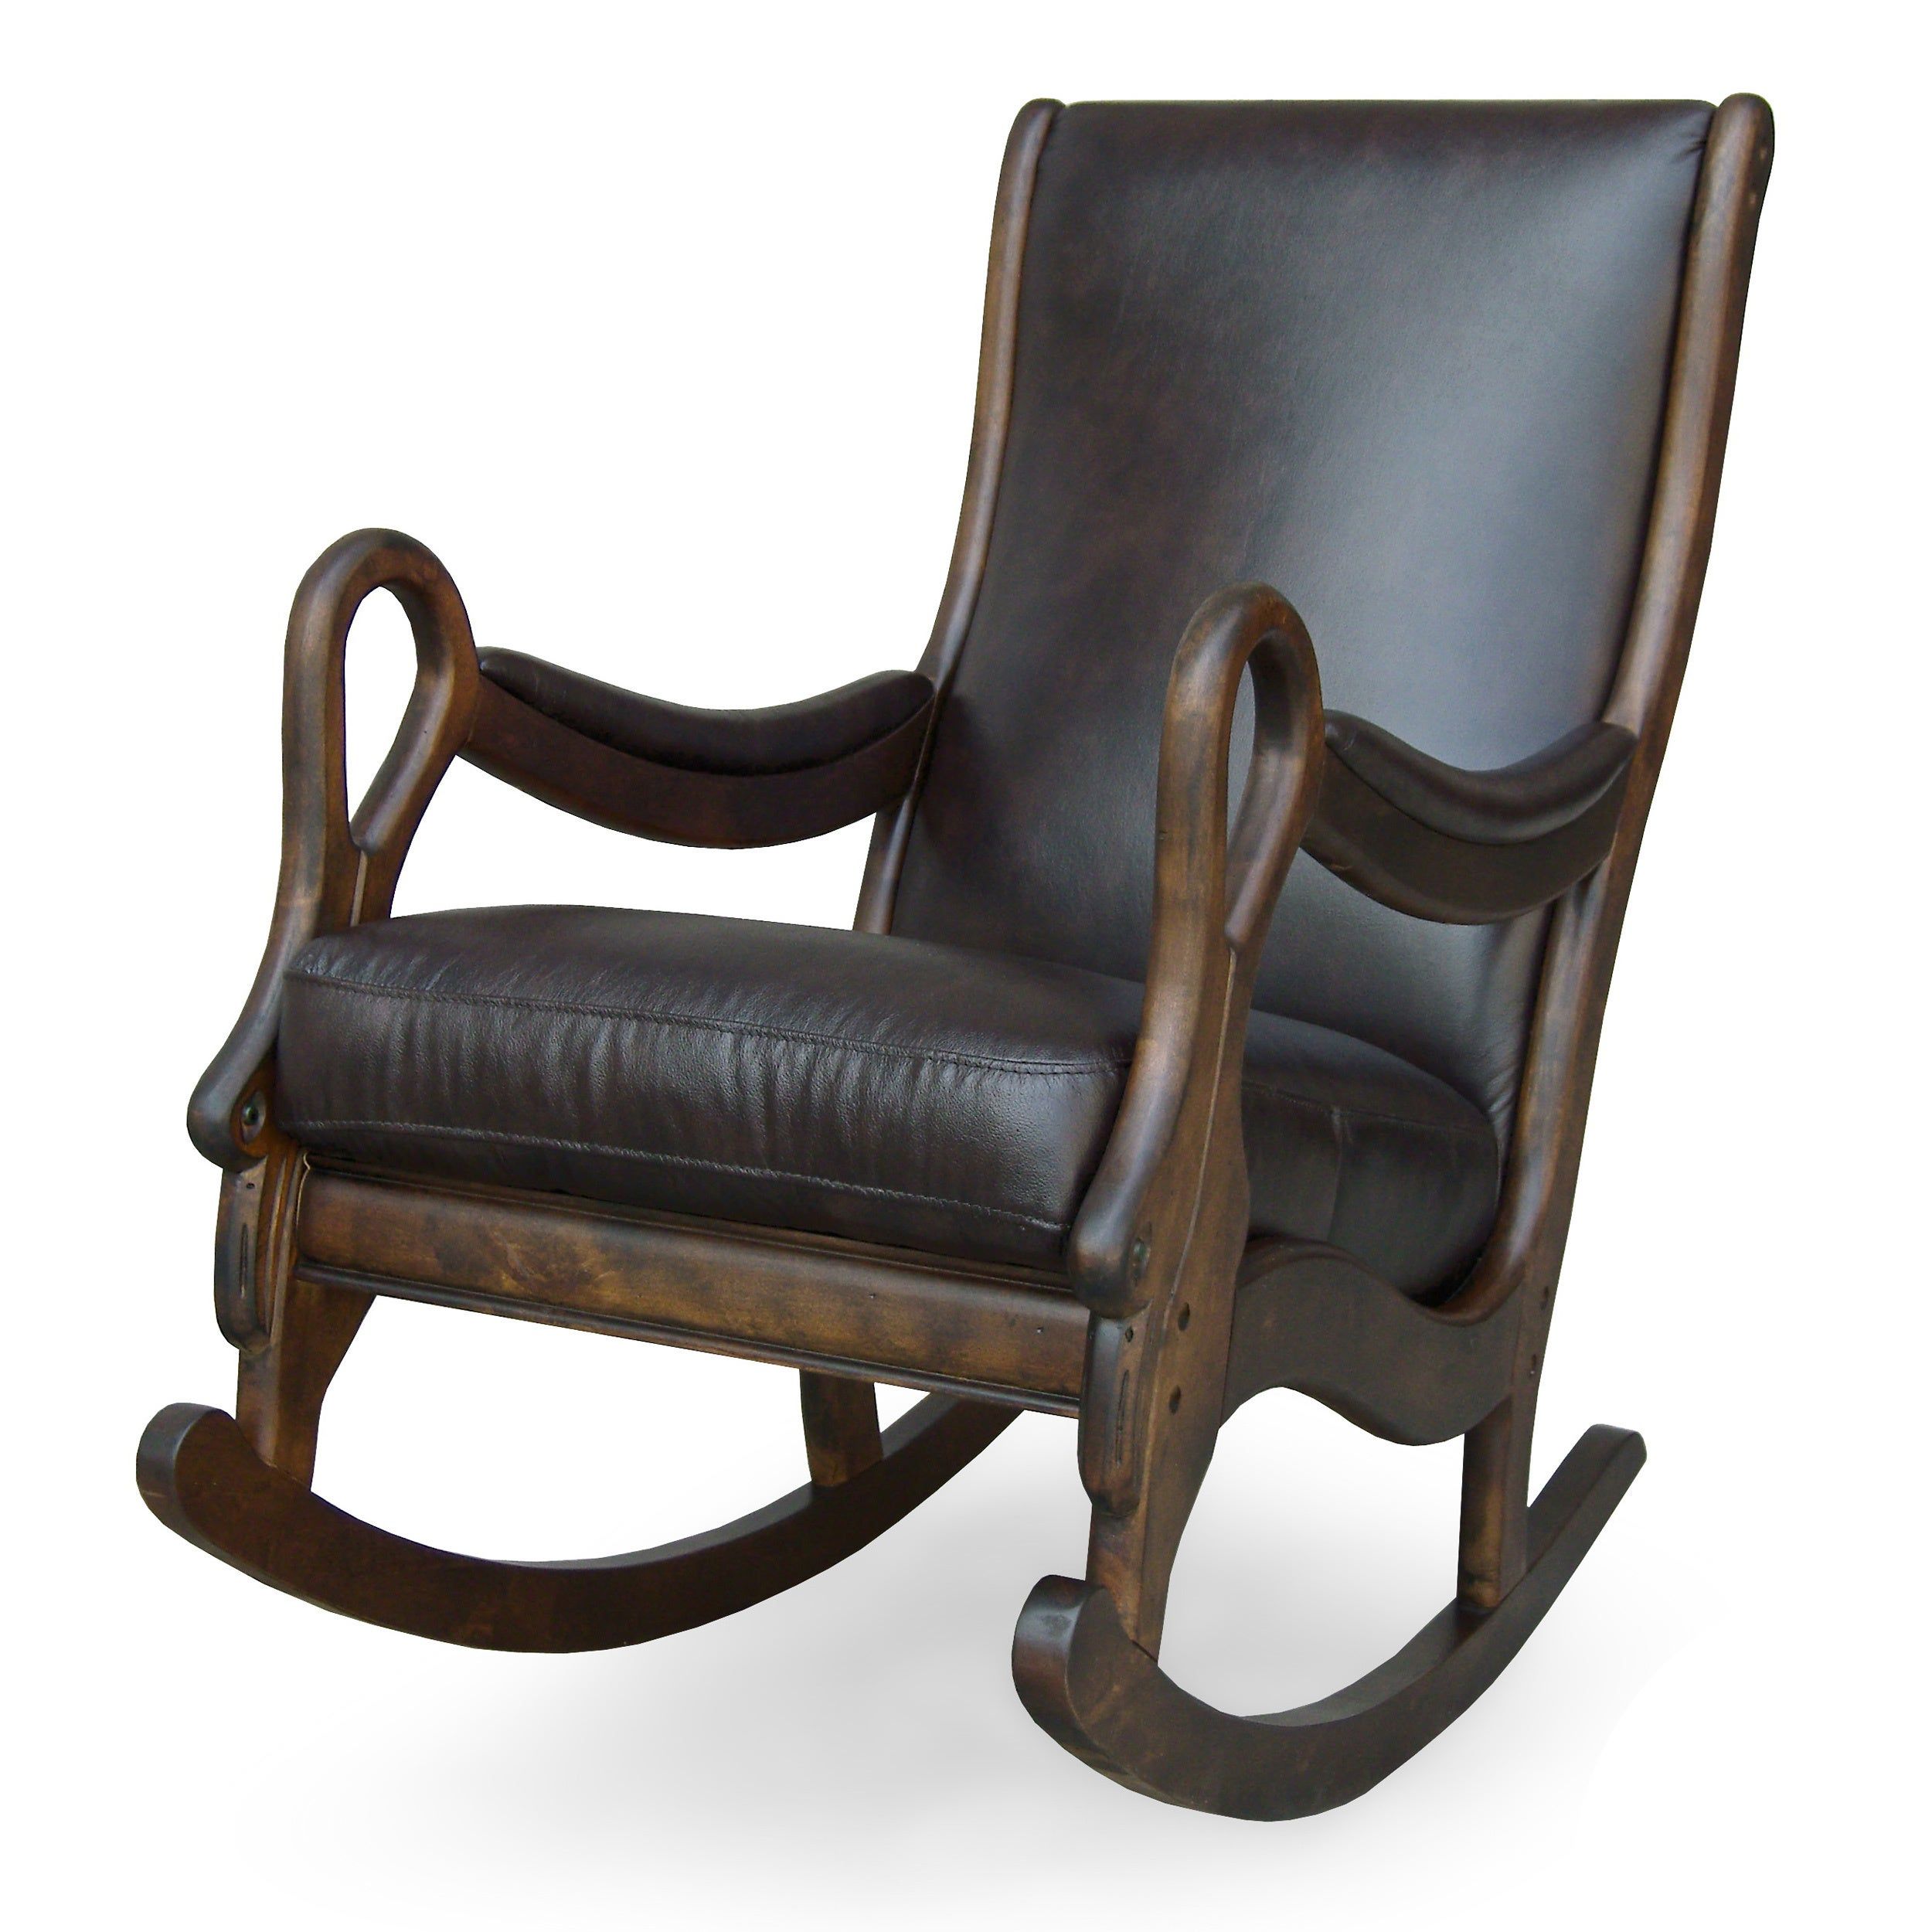 Vintage Leather Rocking Chair With Carbon Loft Ariel Rocking Chairs In Espresso Pu And Walnut (View 4 of 20)